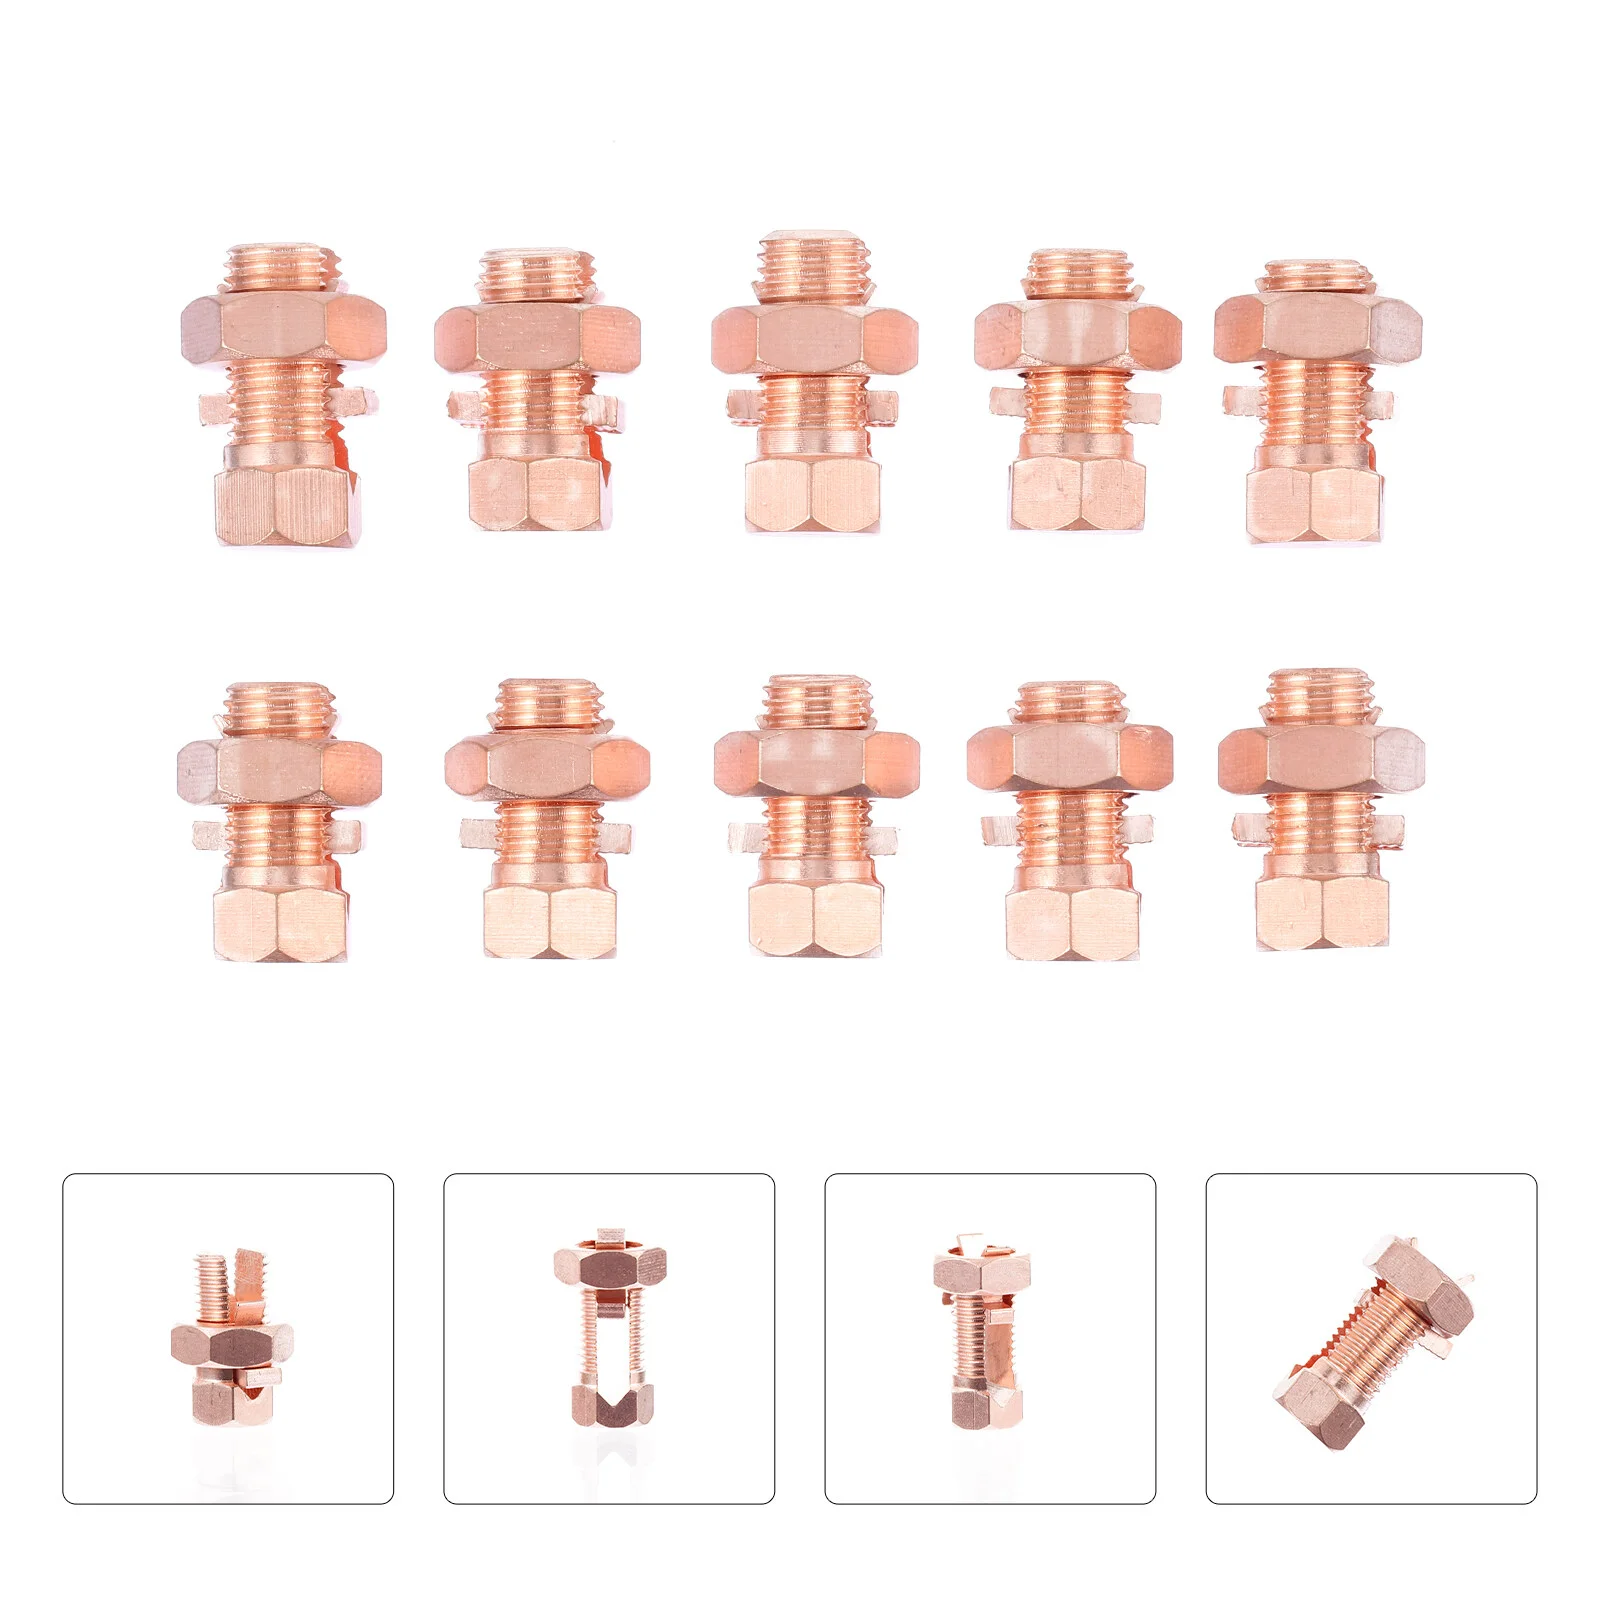 

10 Pcs Strength Copper Bolt Clamp Grounding Split Copper Strength Connector Bonding Antenna Electric Wire